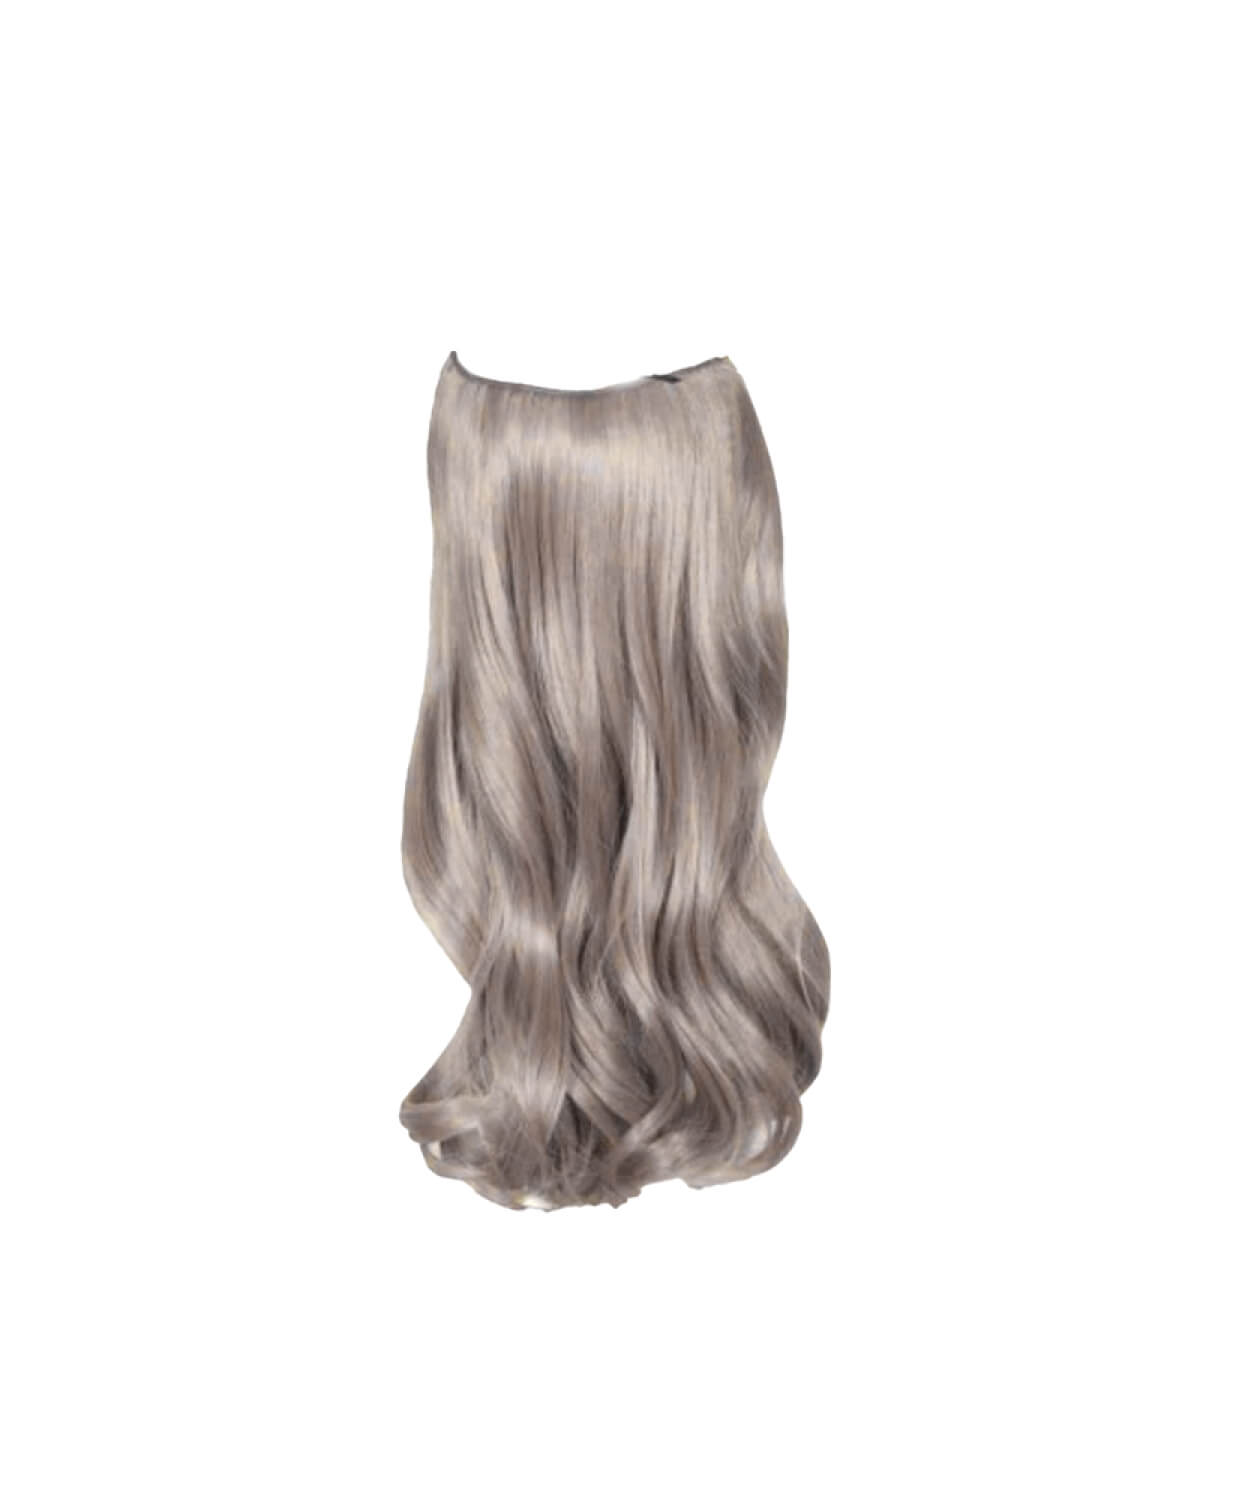 (Product 2) Sample - Wig and Accessories For Sale